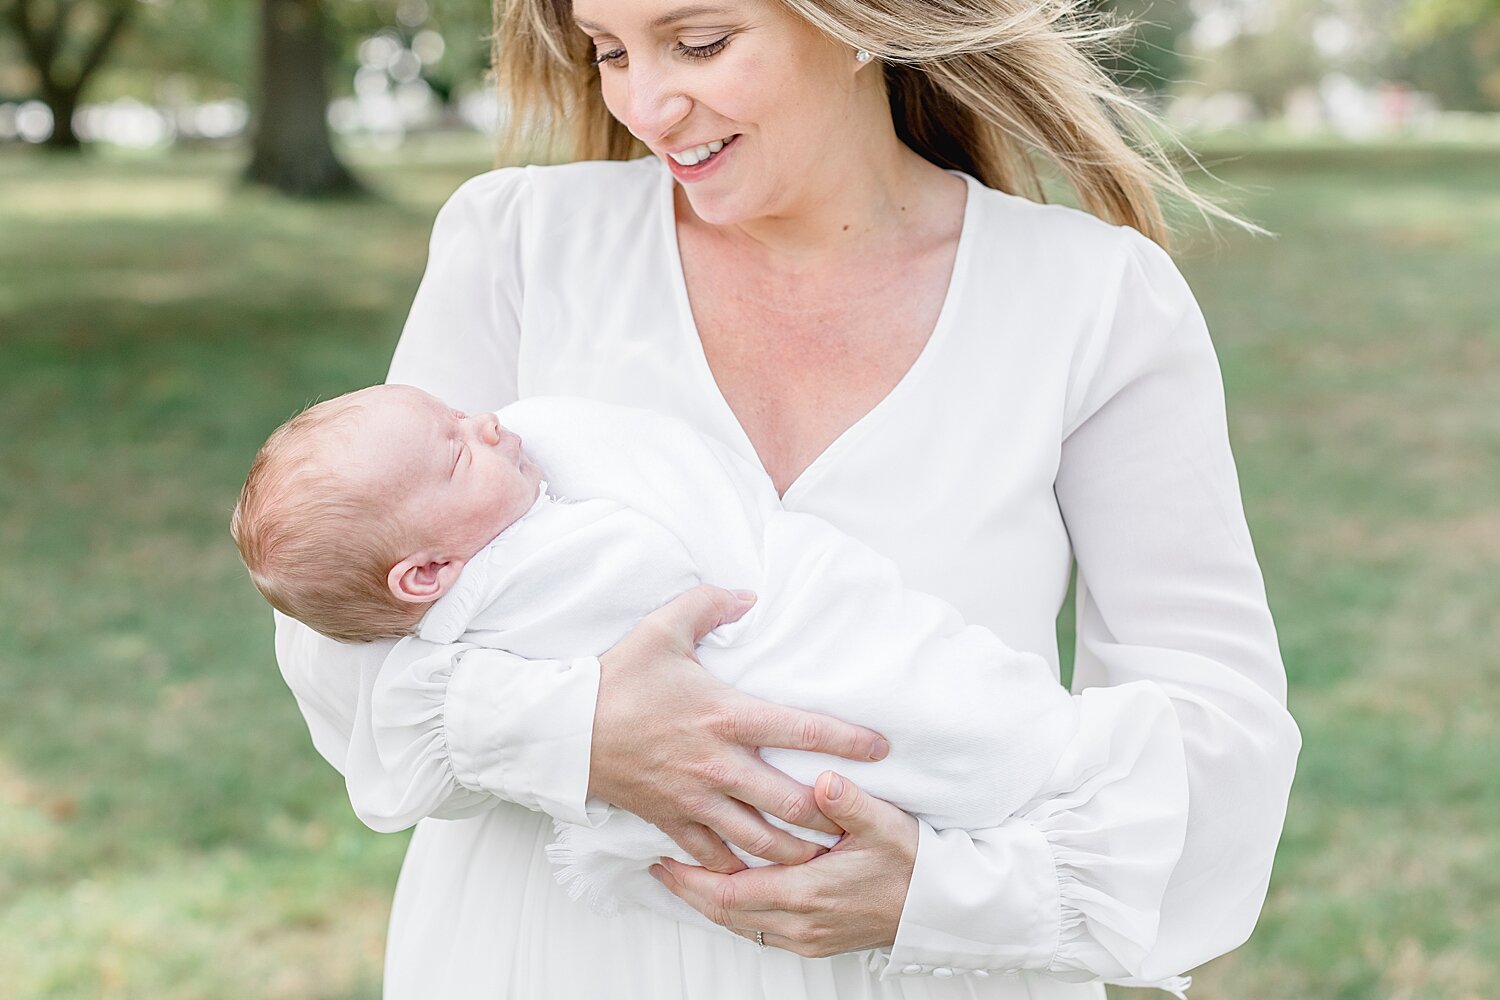 Mom with baby boy during newborn session. Both are wearing white. Photos by Kristin Wood Photography.